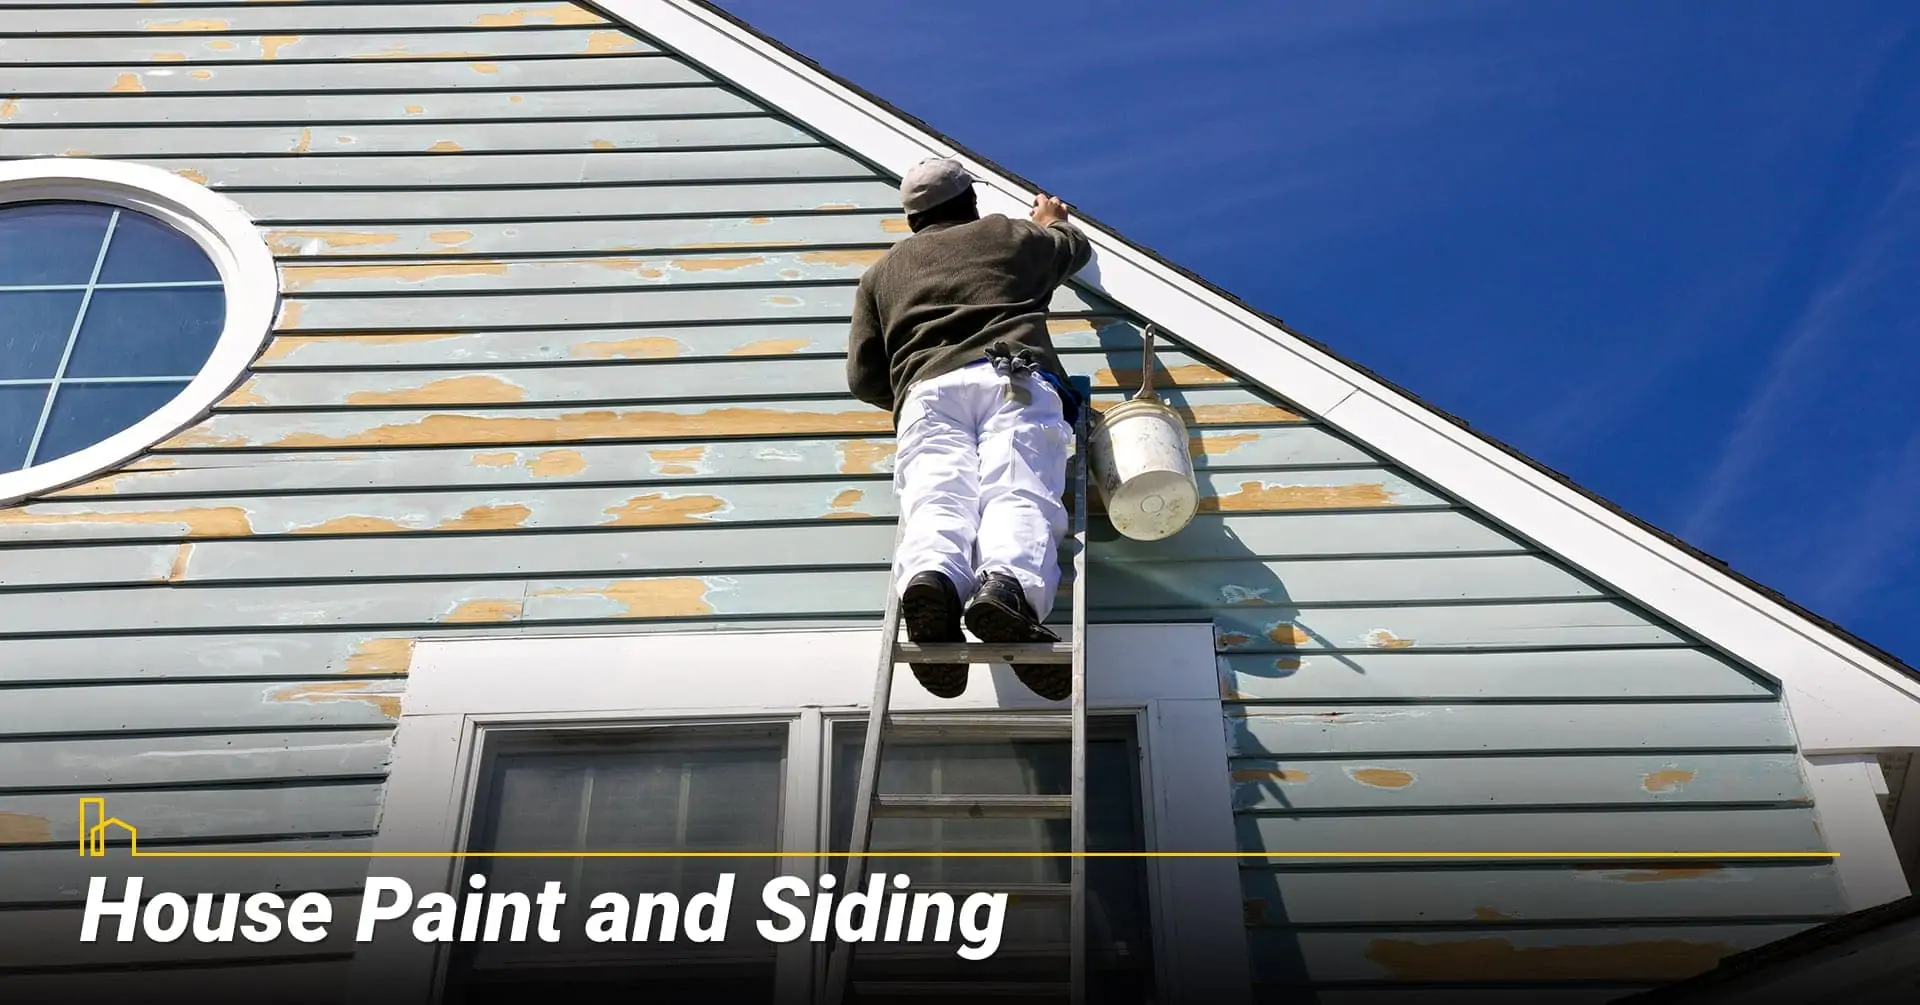 House Paint and Siding, give your siding a new coat of paint